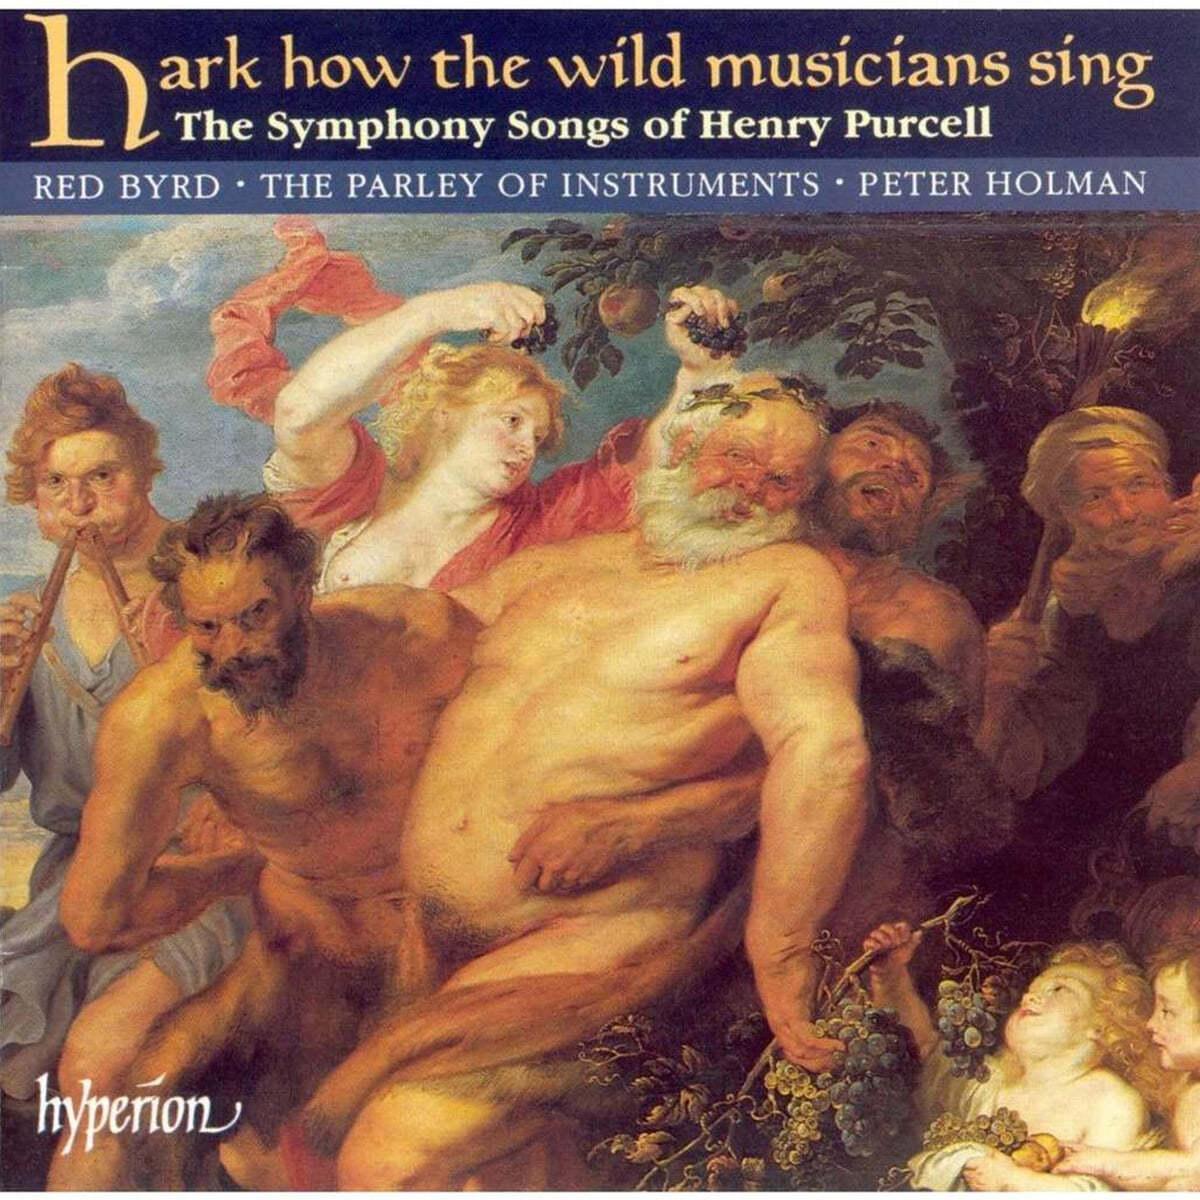 The Parley of Instruments 퍼셀 : 들어라 저 야생의 음악가가 어떻게 노래하라 (Henry Purcell: Hark How The Wild Musicia Sing - The Symphony Songs of Henry Purcell)